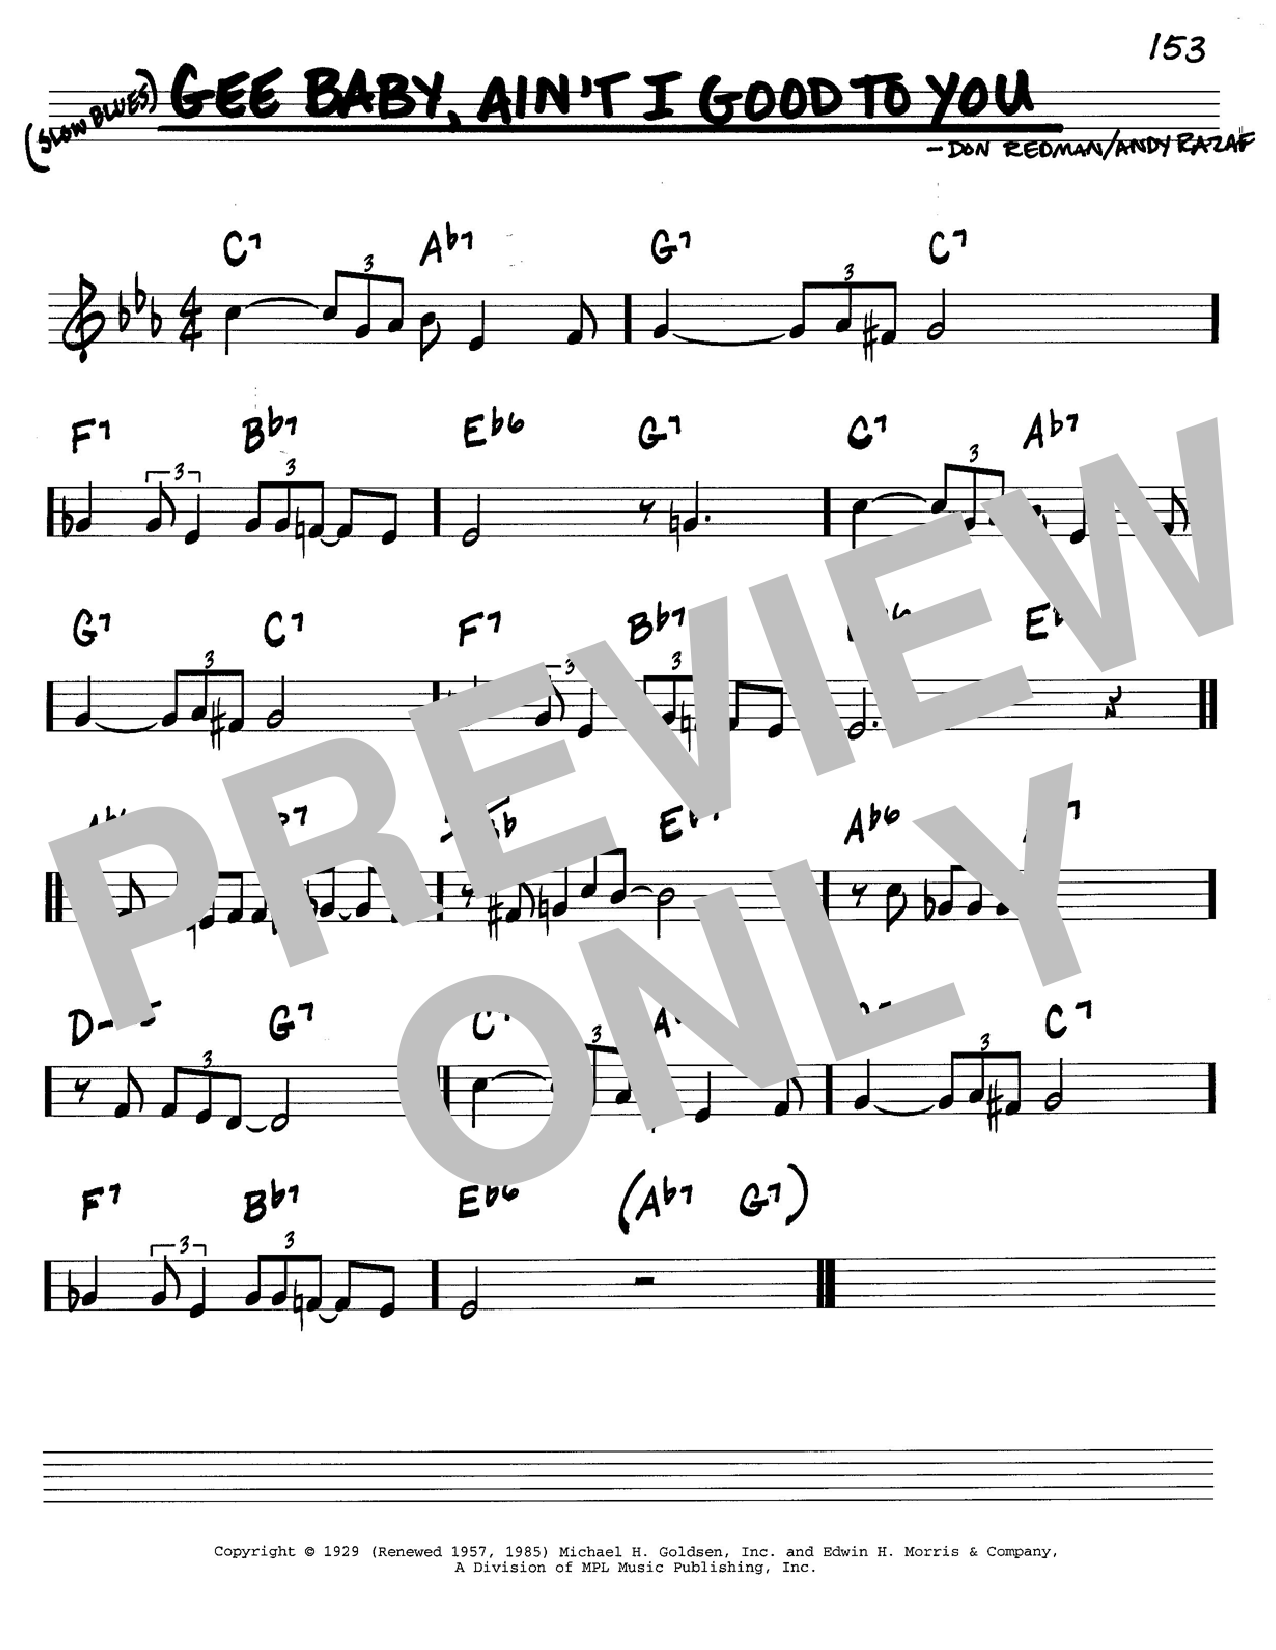 Gee Baby, Ain't I Good To You sheet music